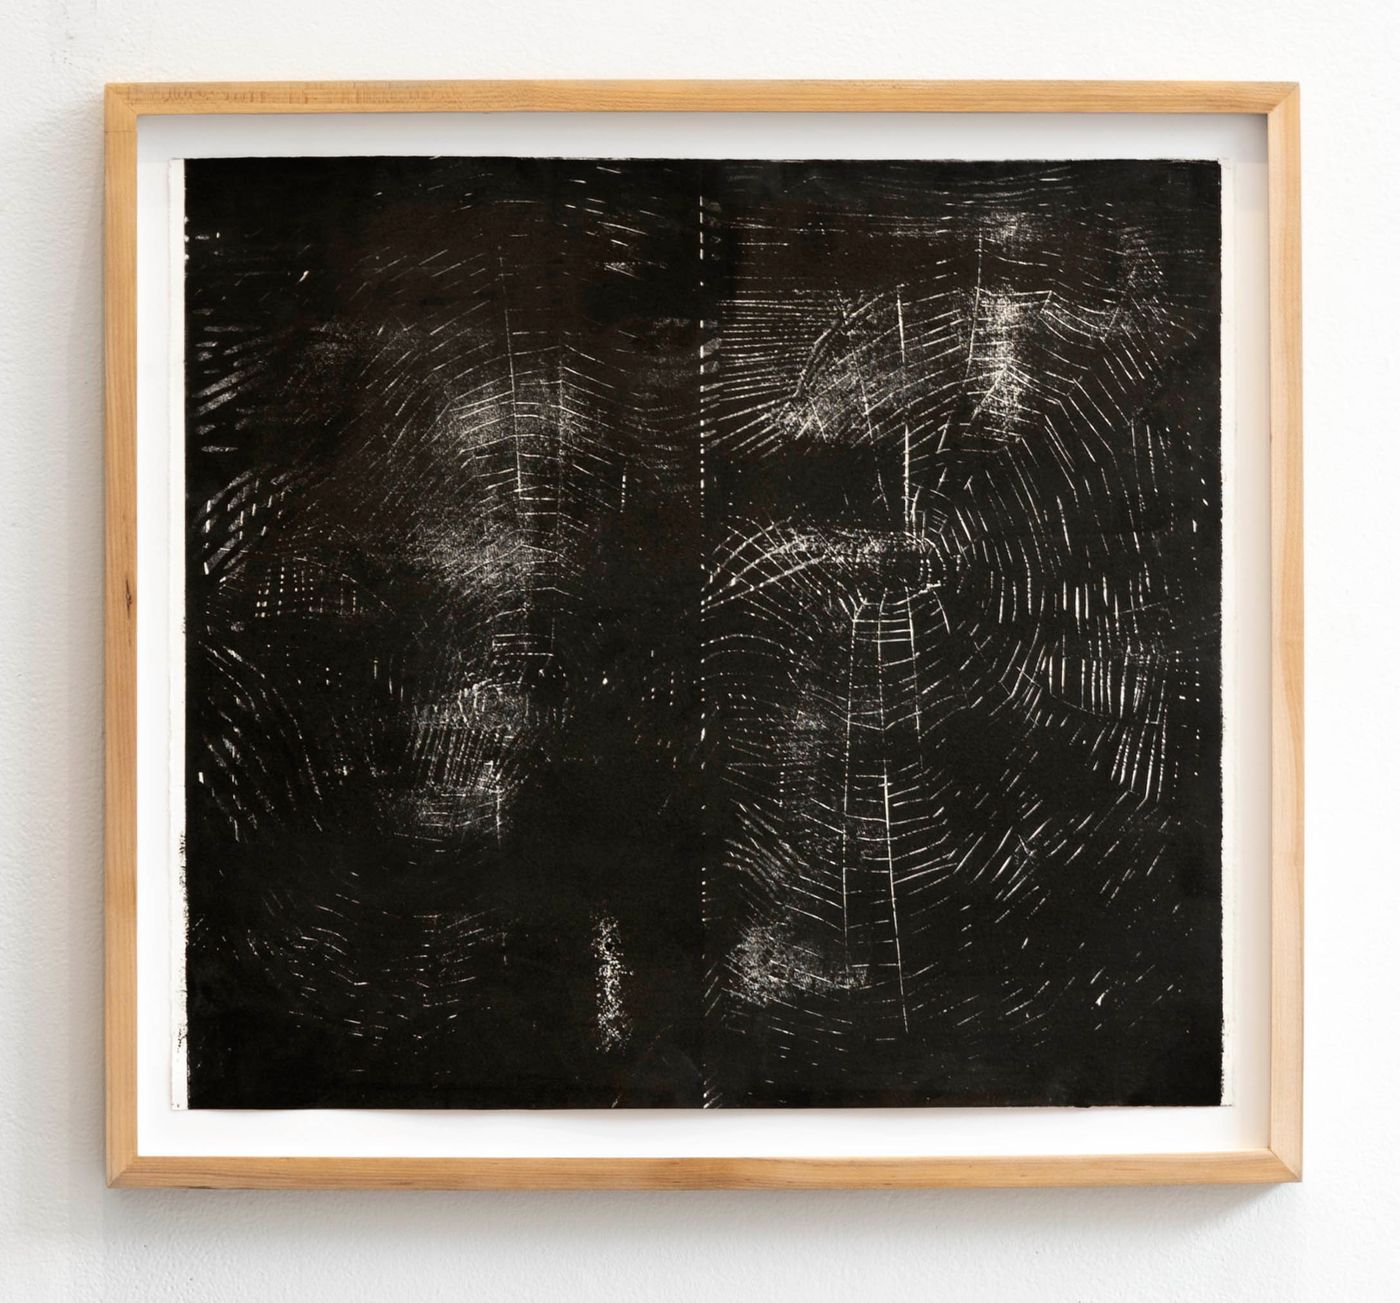 Spider Web on Two Nights, 2022. Woodcut on paper; 24 x 21.5 in. Photo: Allison Minto.